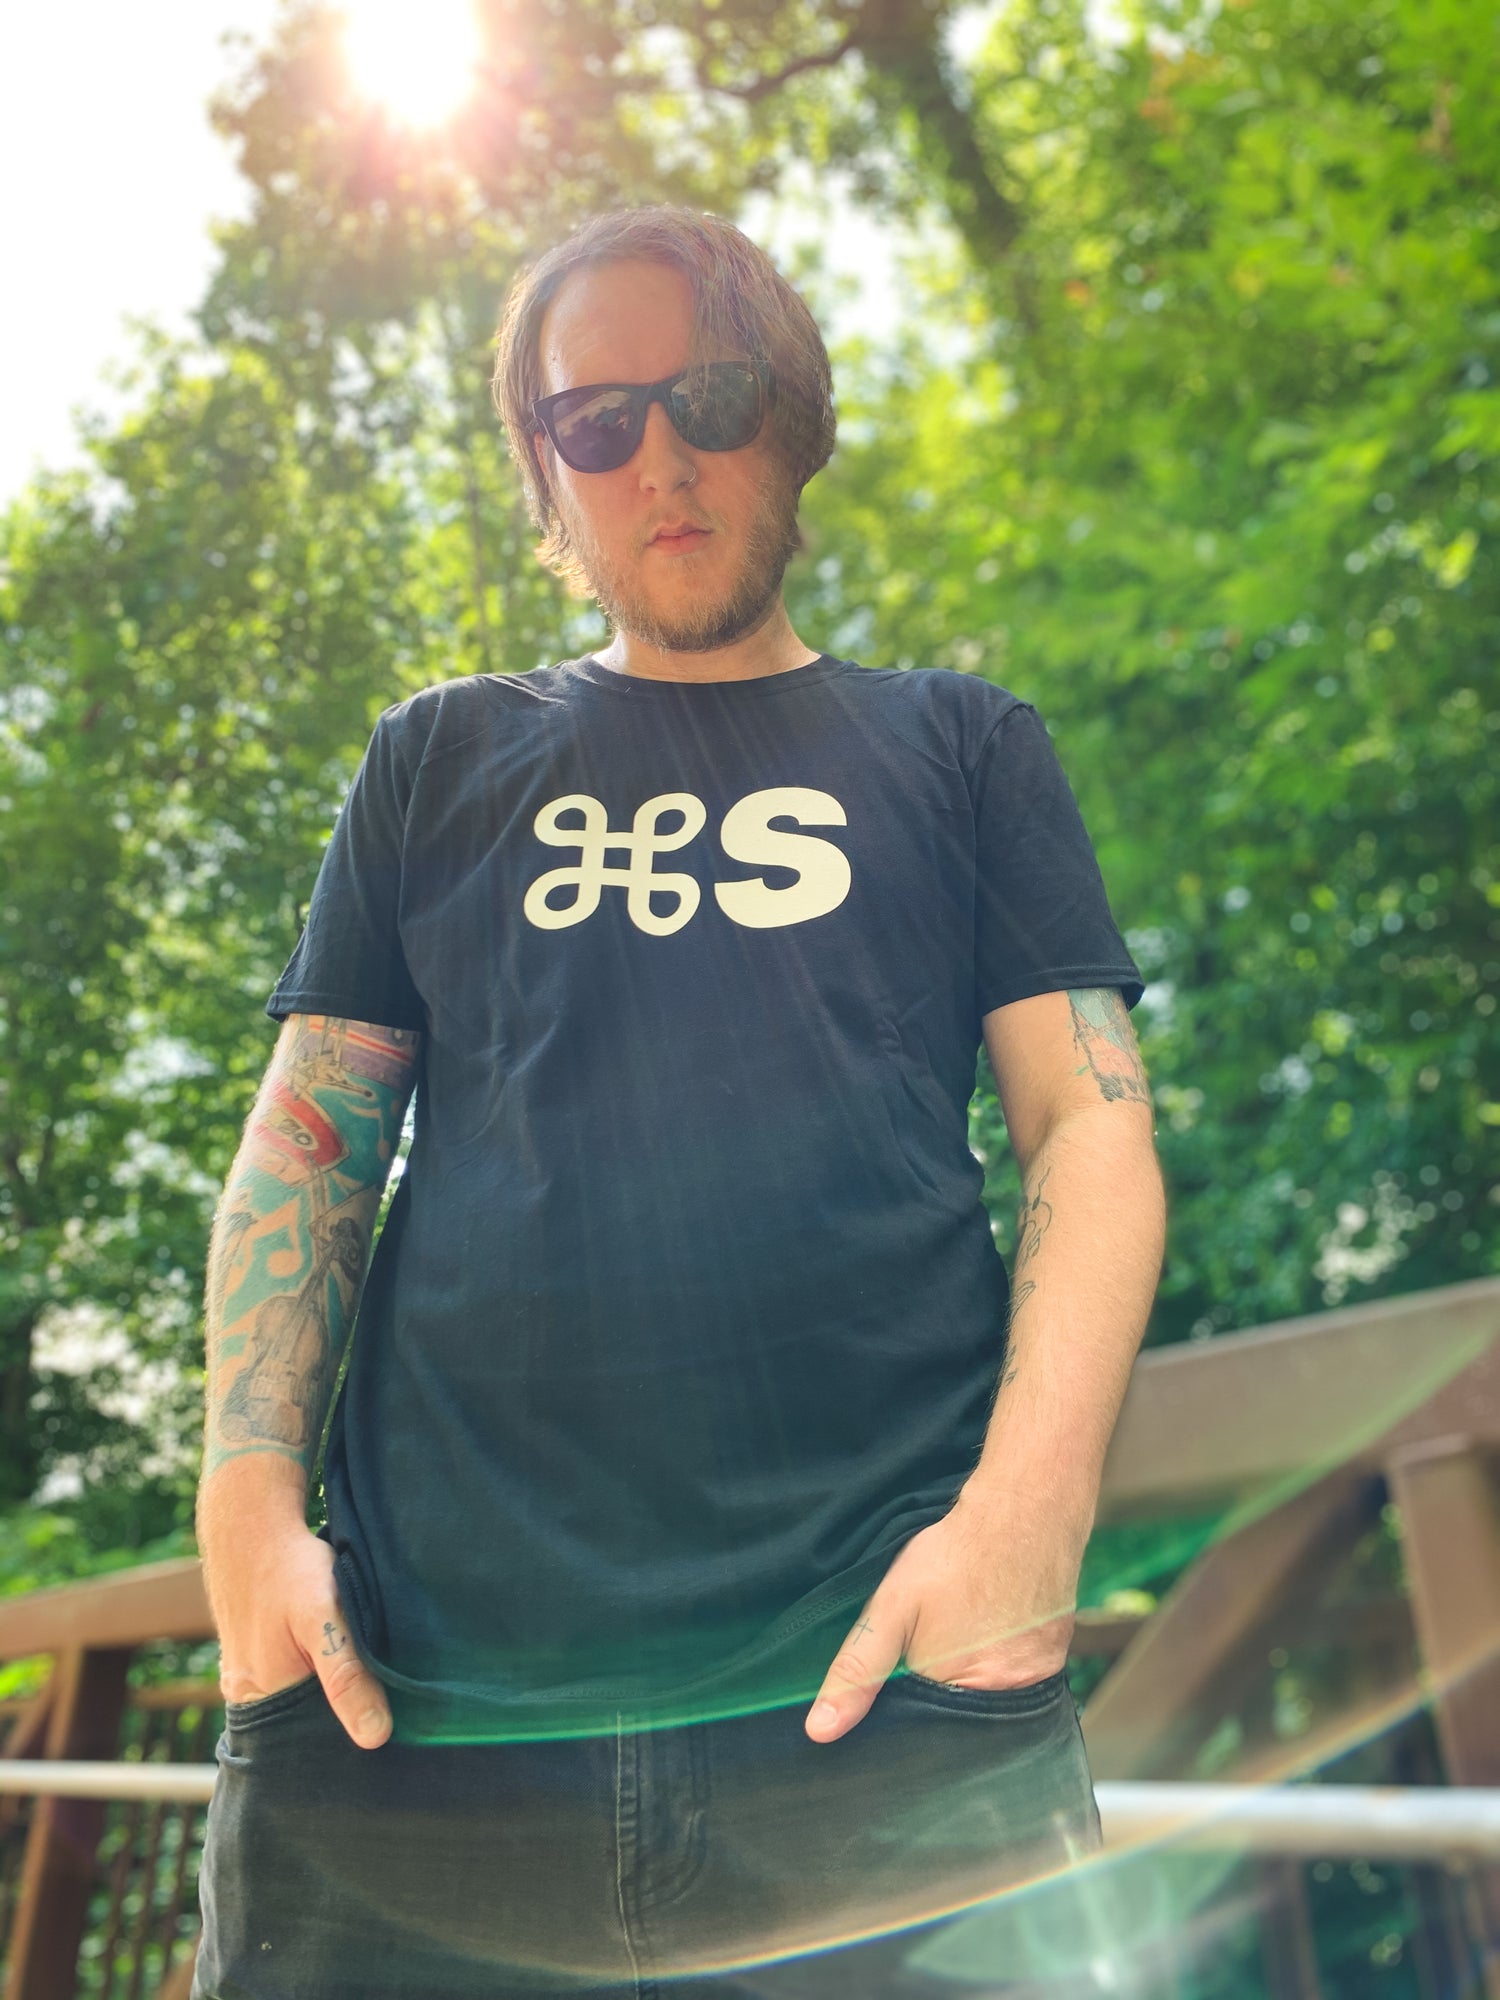 Man stands in park wearing black command s tee